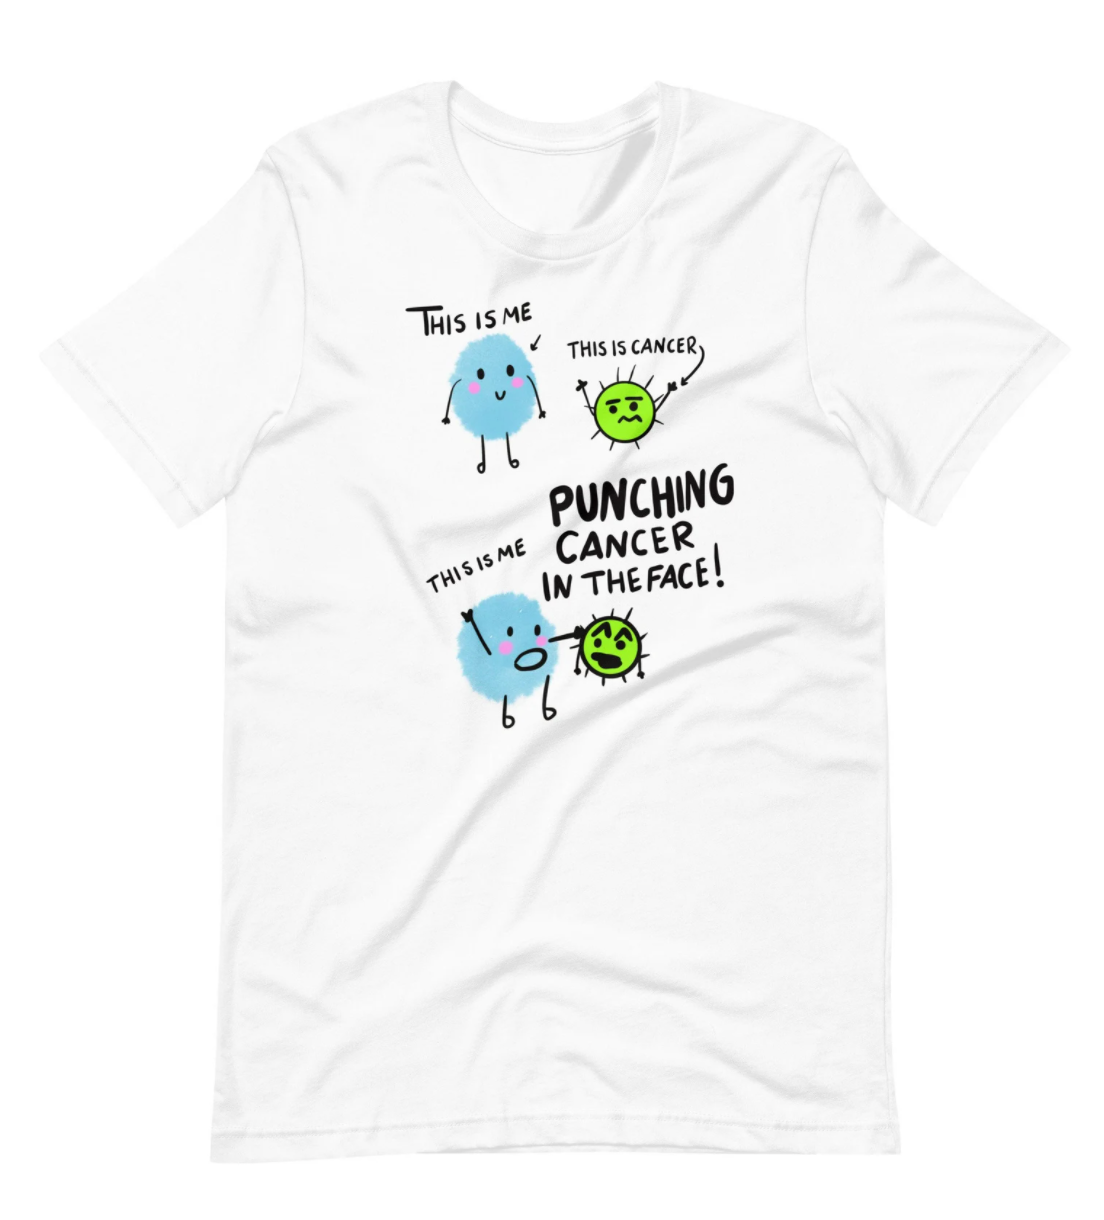 This is Me Punching Cancer in the Face Shirt - Funny Cancer Shirt - Chemo Shirt - End of Chemo Shirt - Cancer Fighter Gift